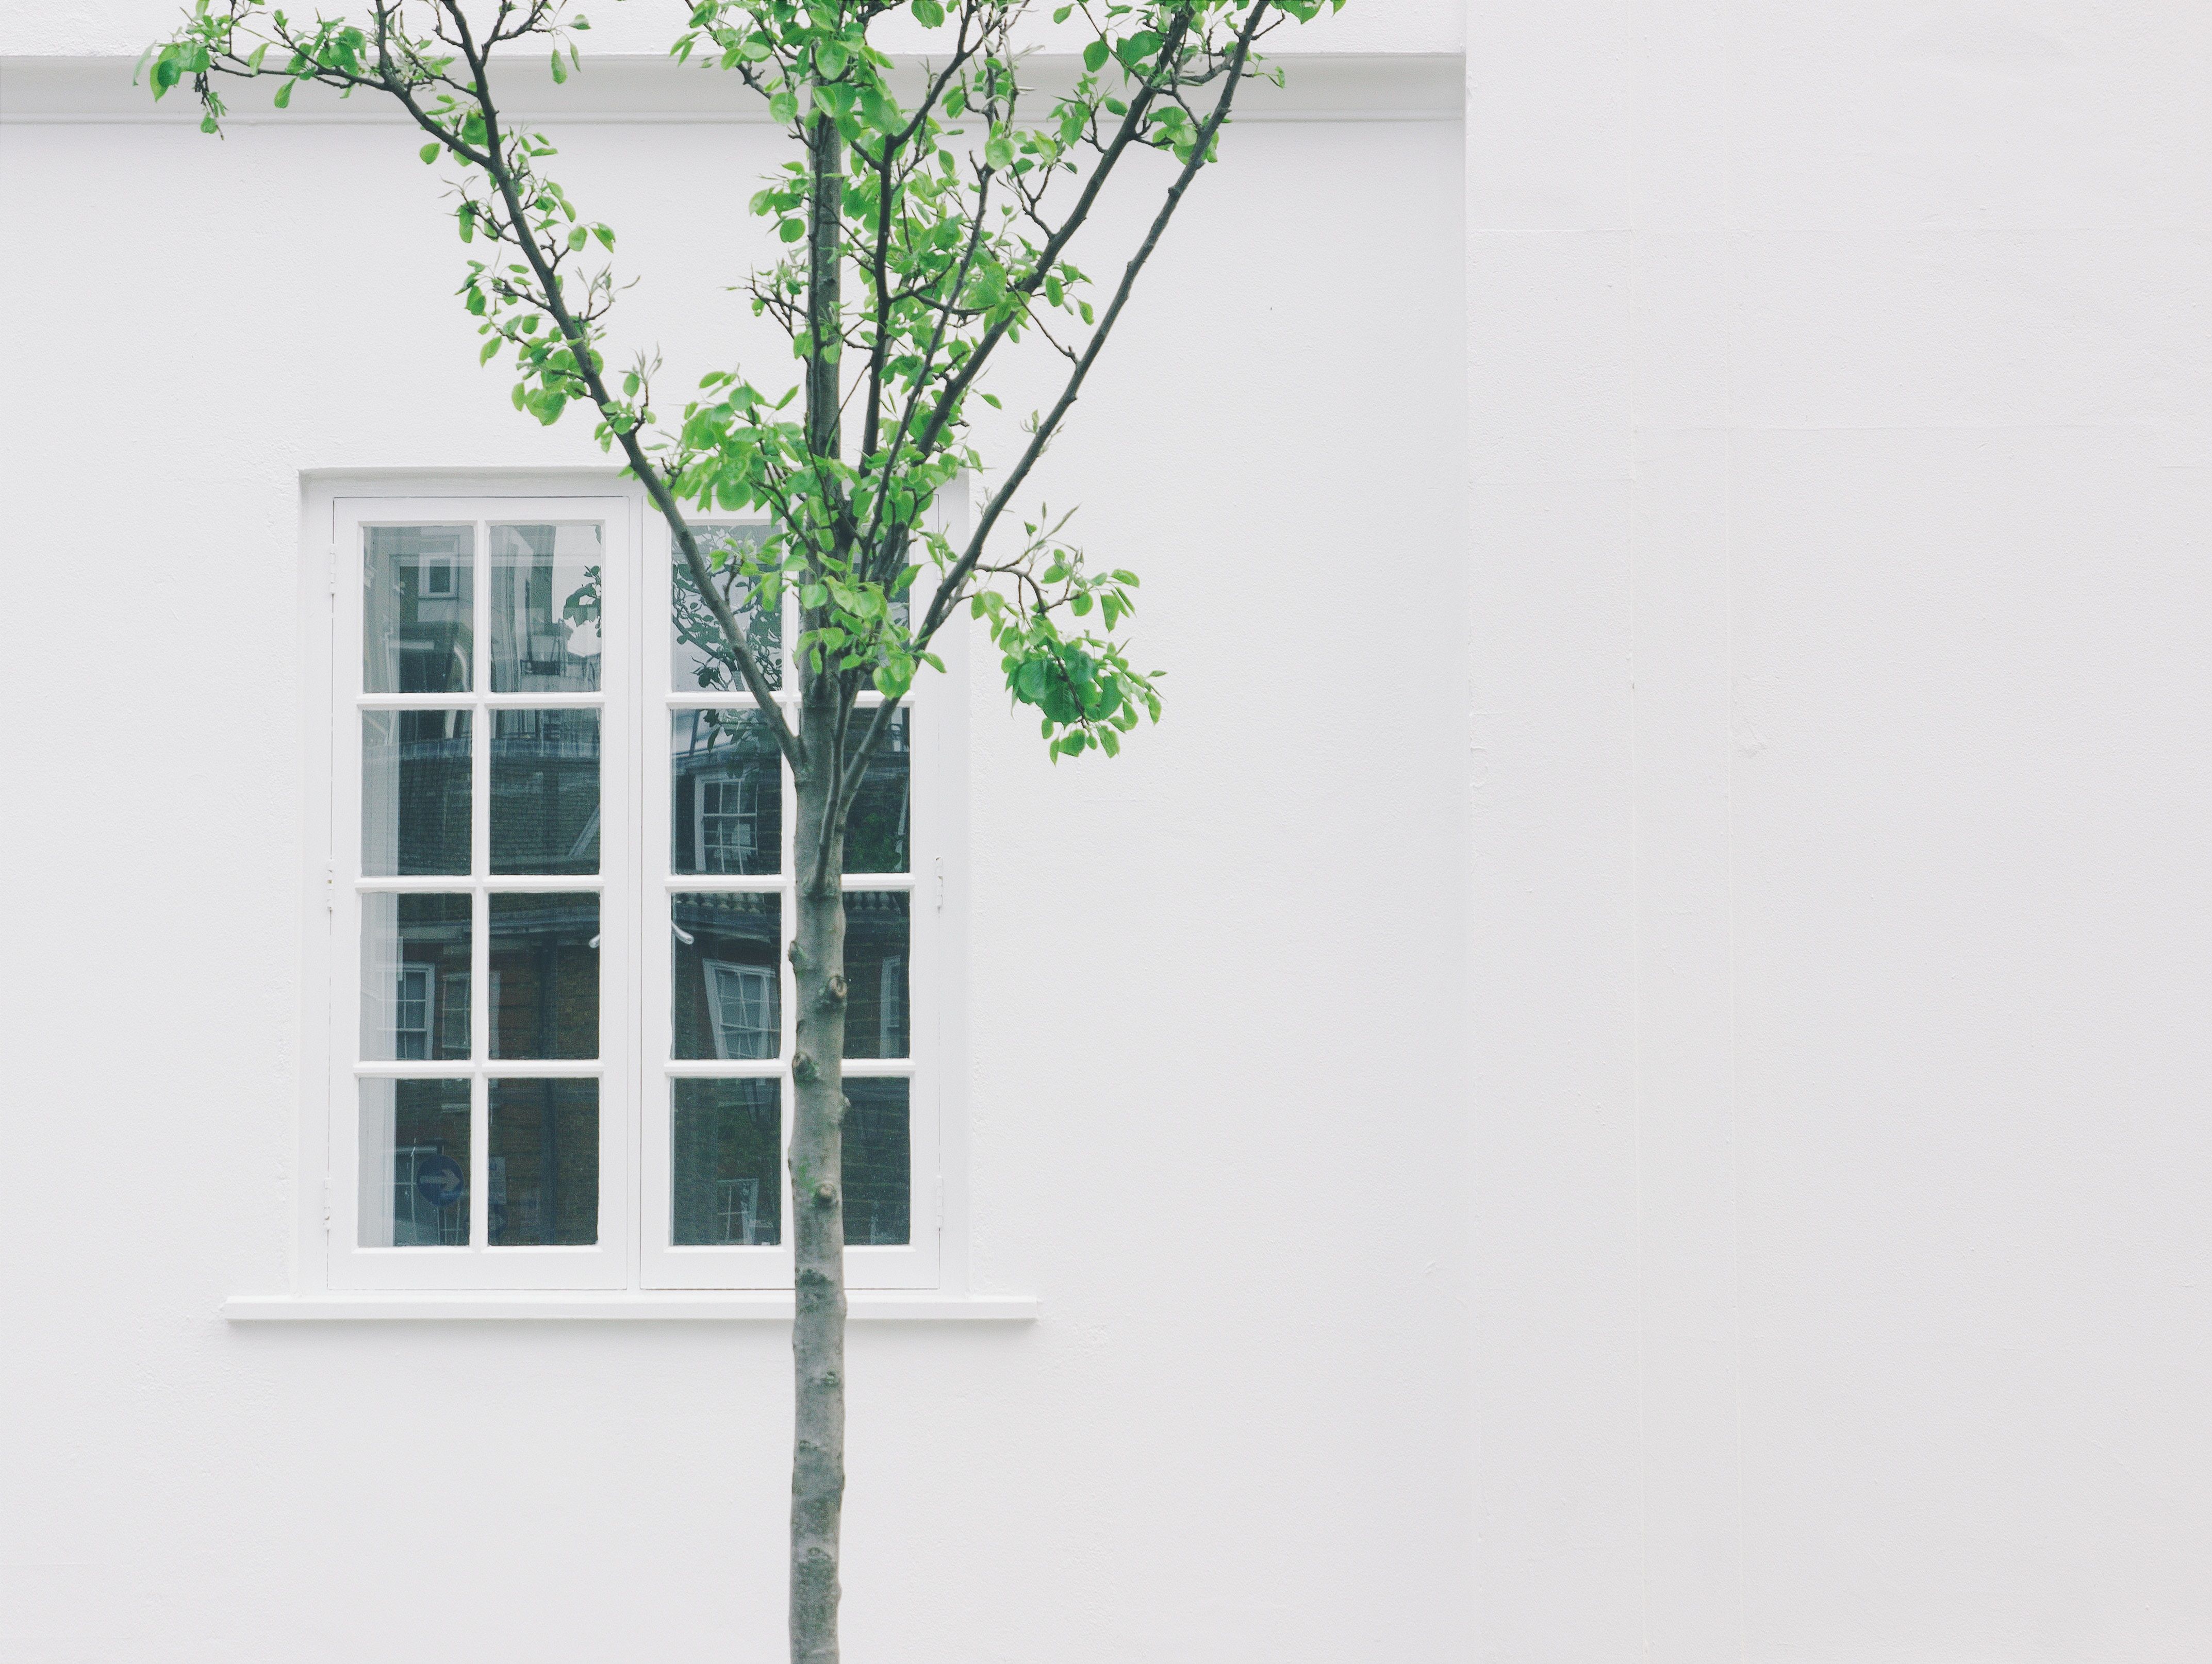 4290x3228 tree, wallpaper, aesthetic, minimalist, cozy, white, cityscape, city, minimal, summer, house, wall, cosy, negative space, love, beach, architecture, street, window, Free picture, simplicity. Mocah HD Wallpaper